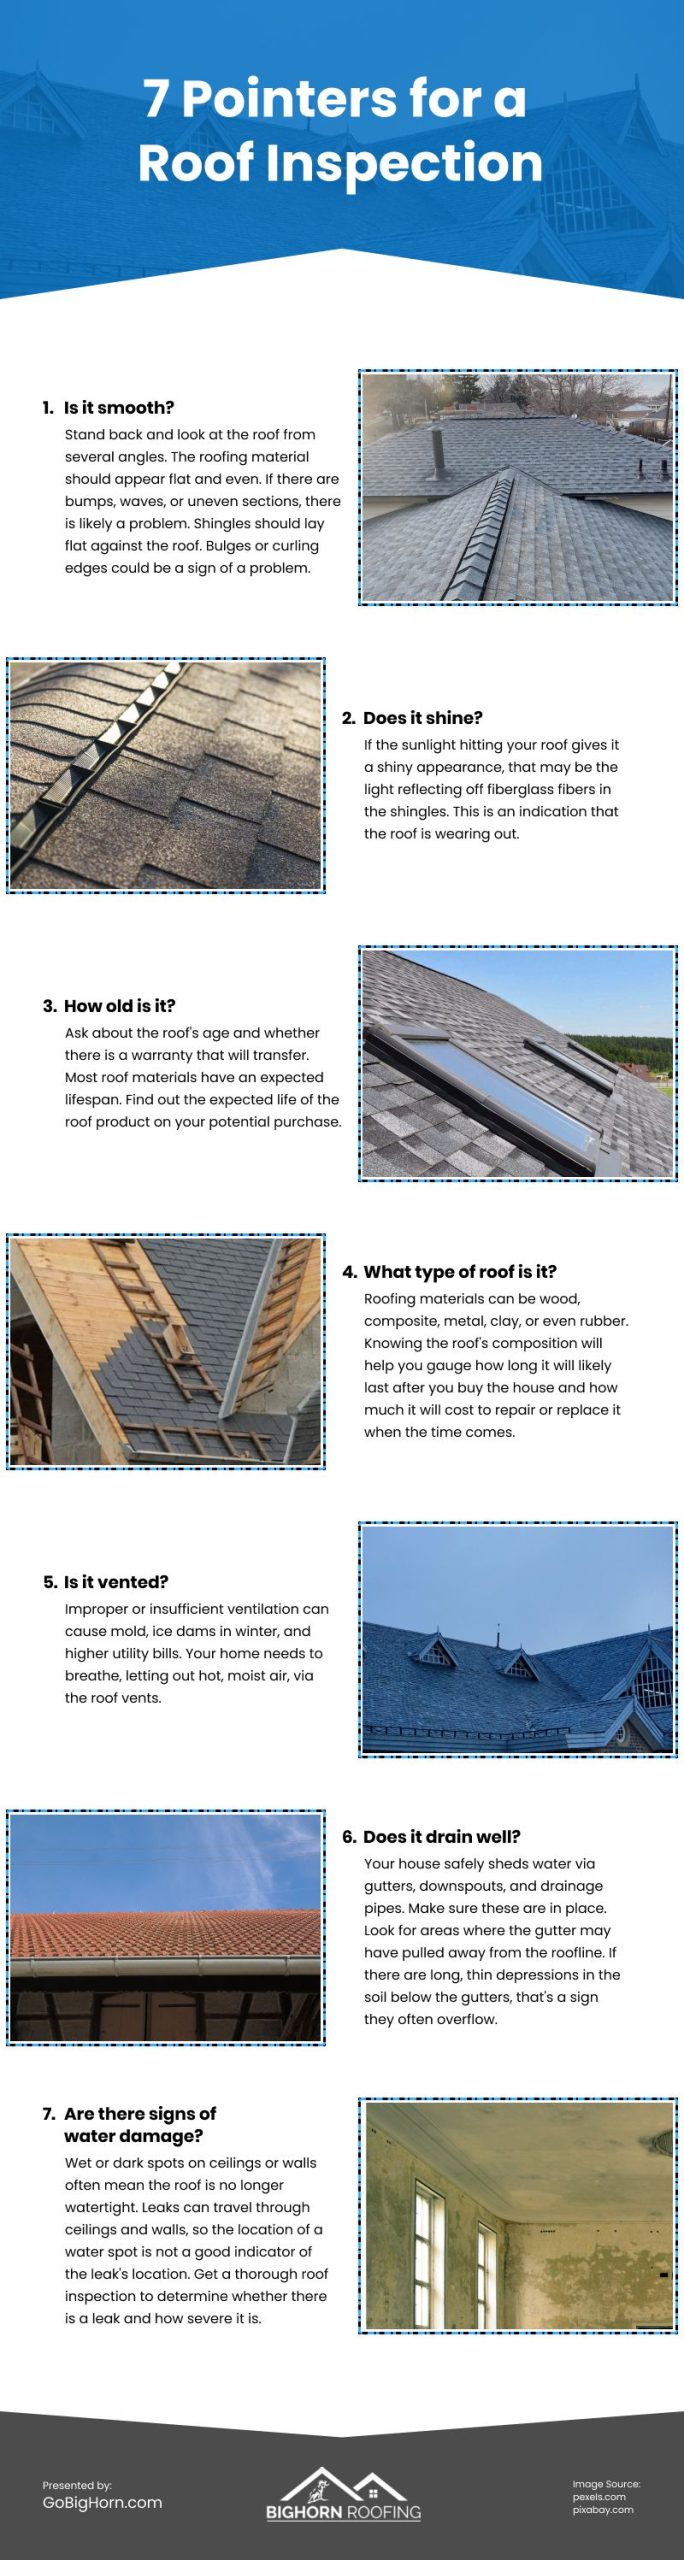 7 Pointers for a Roof Inspection Infographic